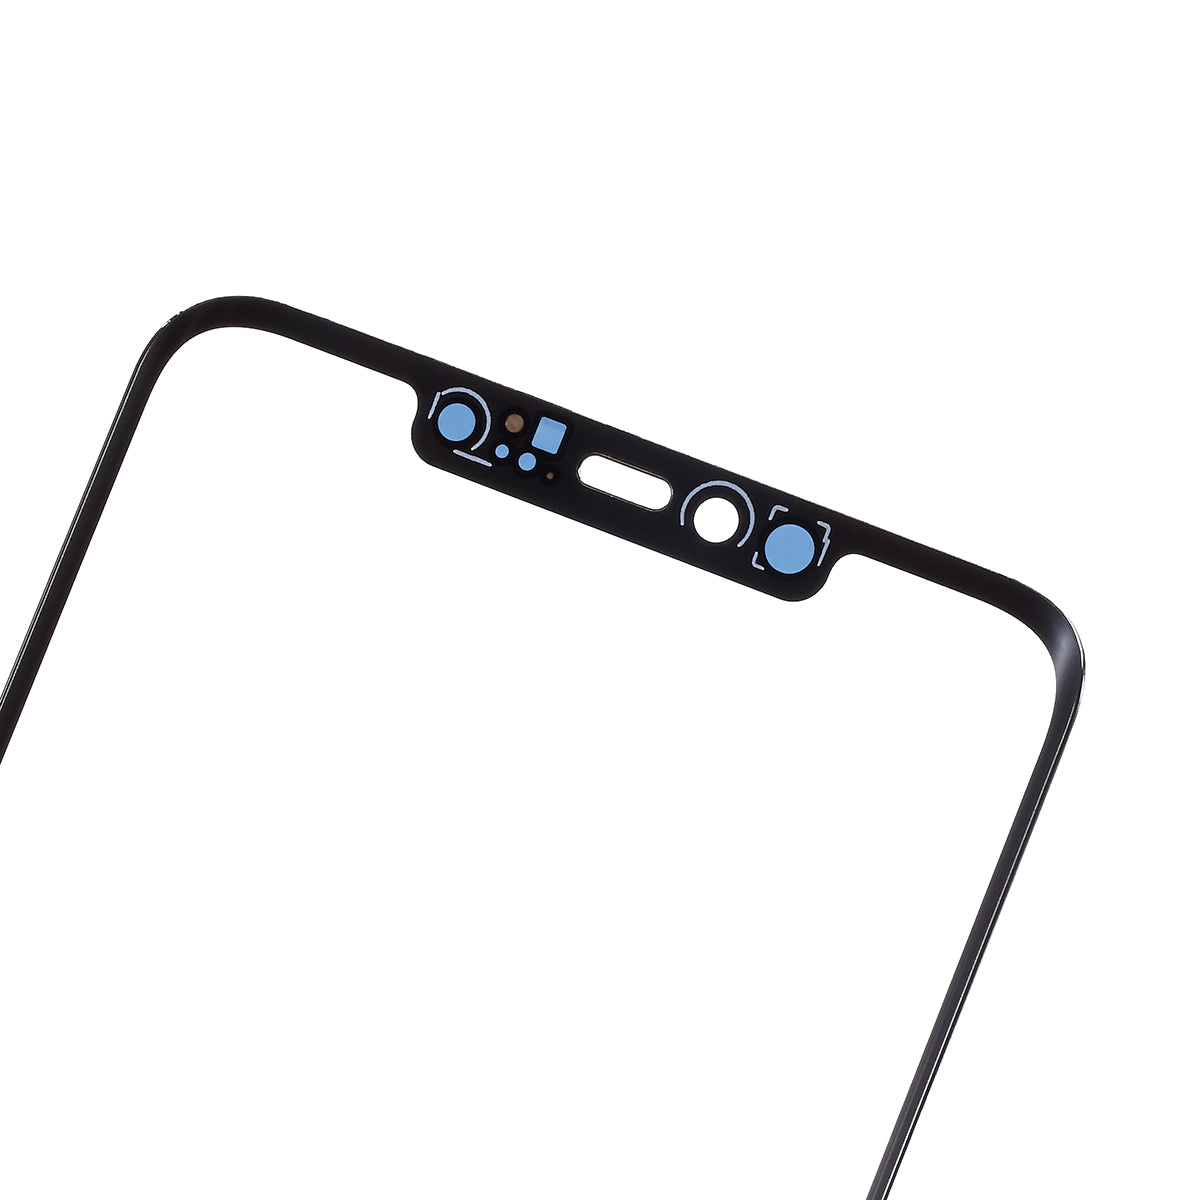 Front Screen Glass Lens Replacement for Huawei Mate 20 Pro (without Logo)